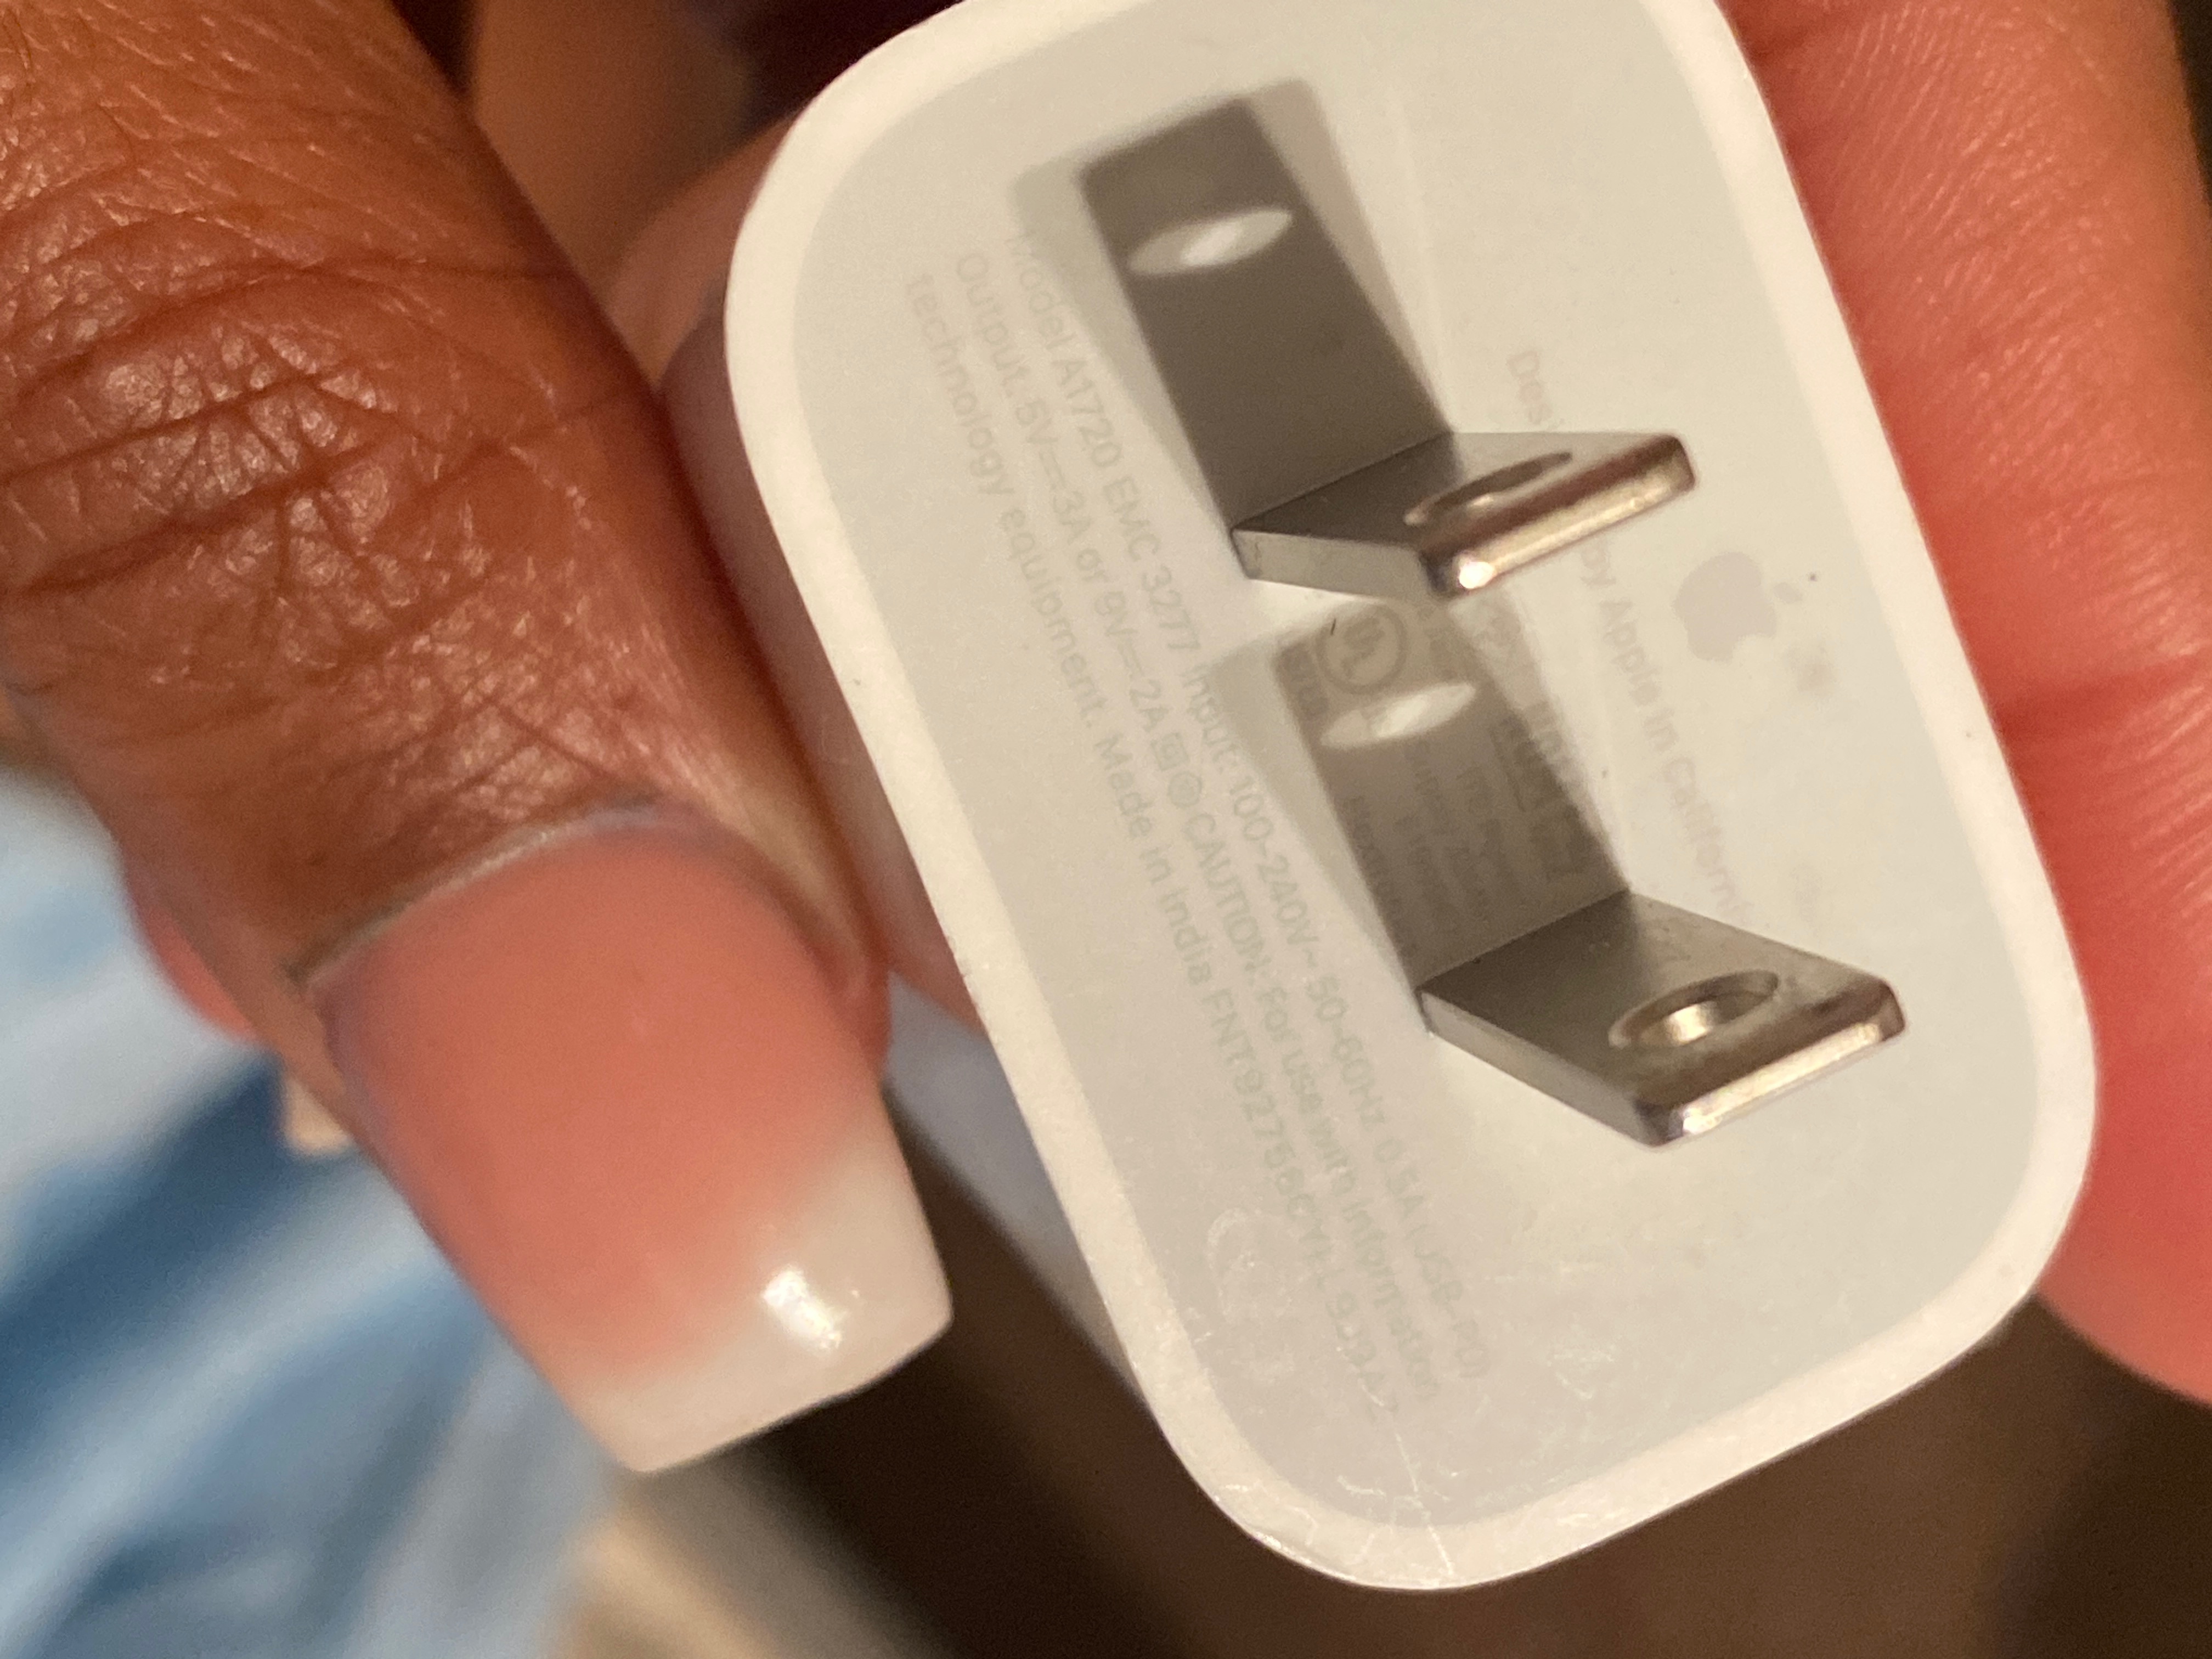 Apple charger - Apple Community